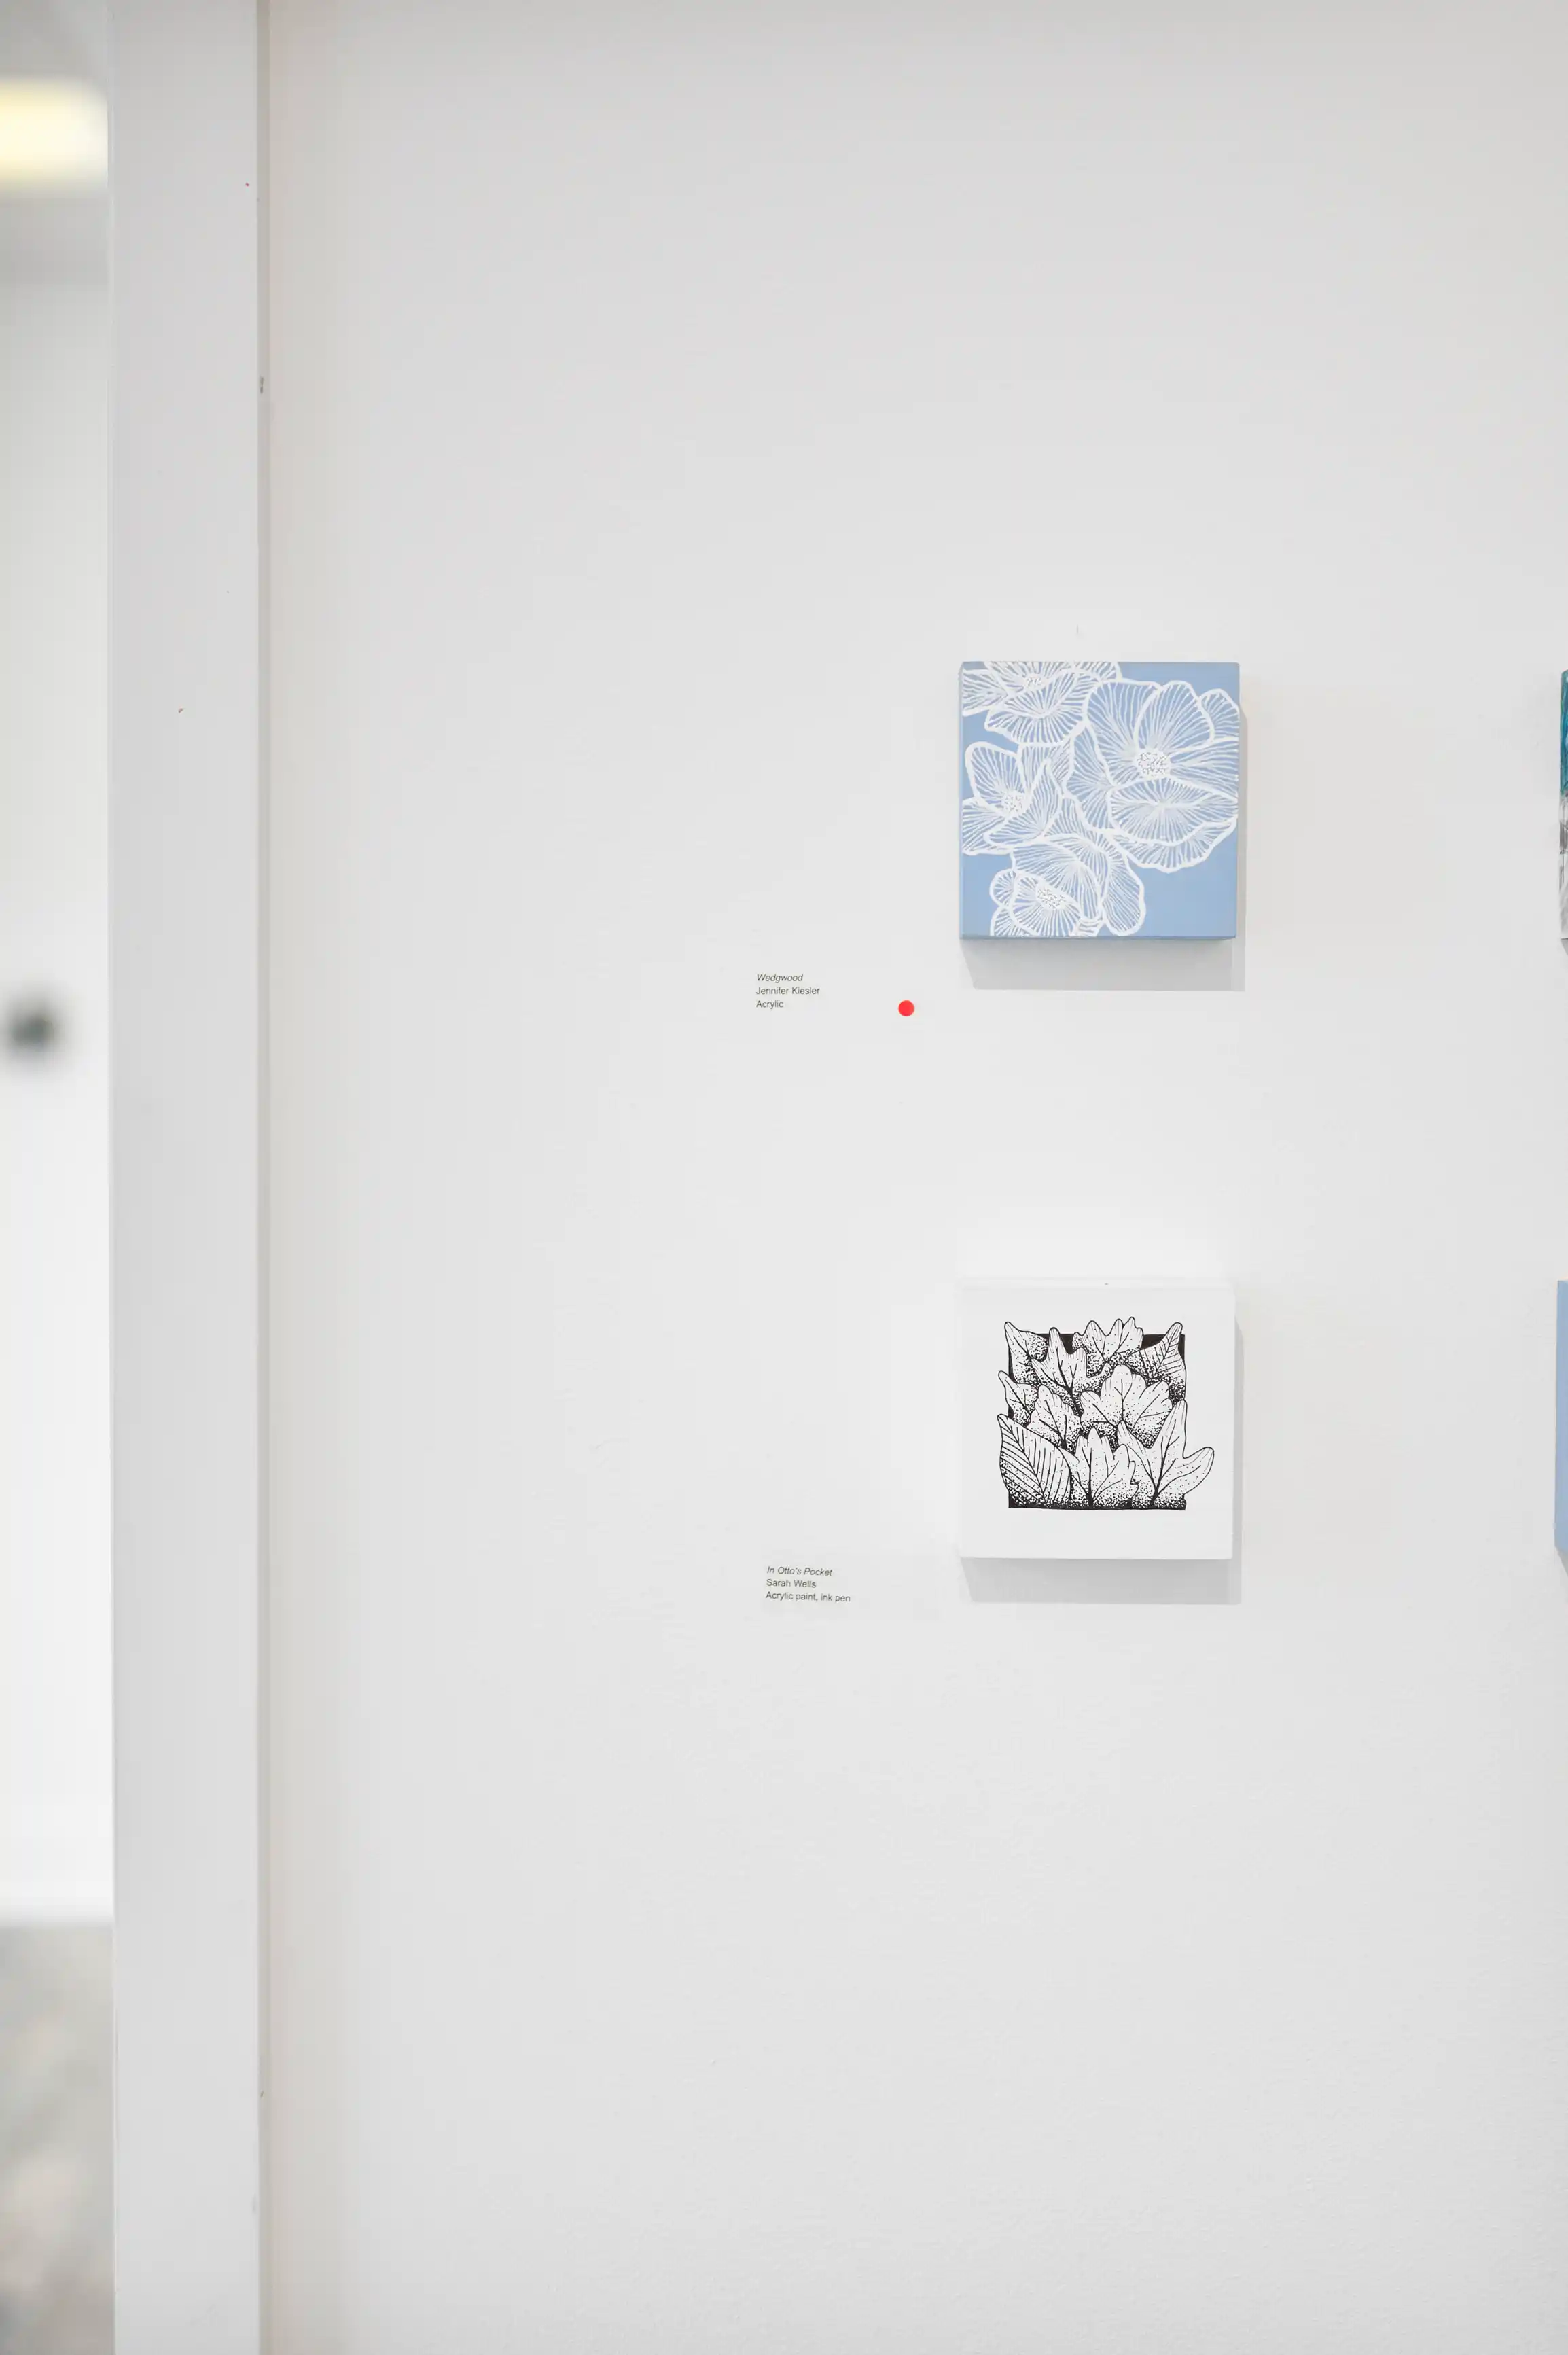 Two monochrome botanical illustrations hung on a white gallery wall with descriptive text labels and red dots indicating sold artwork.